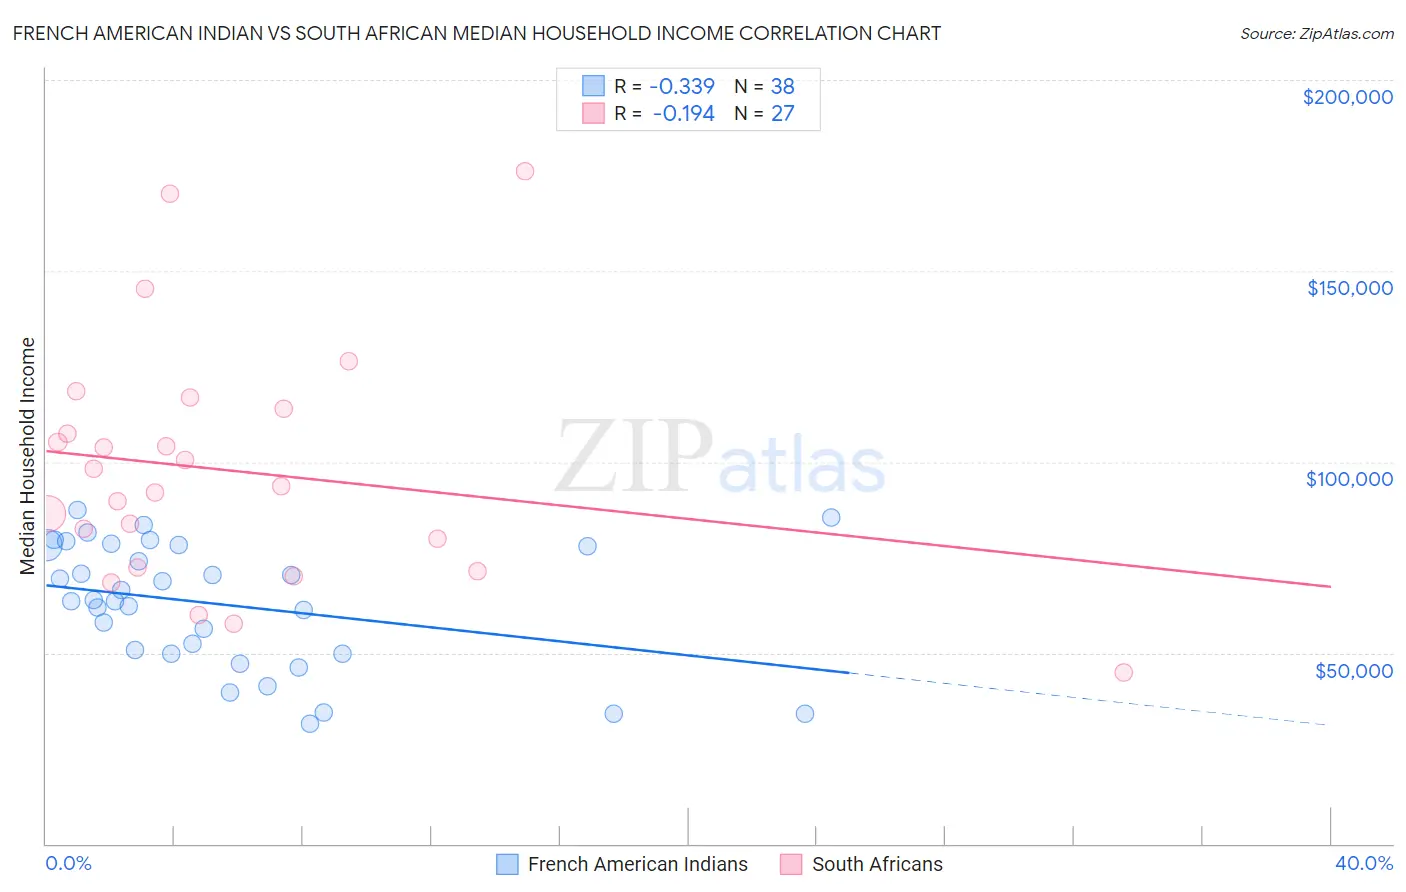 French American Indian vs South African Median Household Income